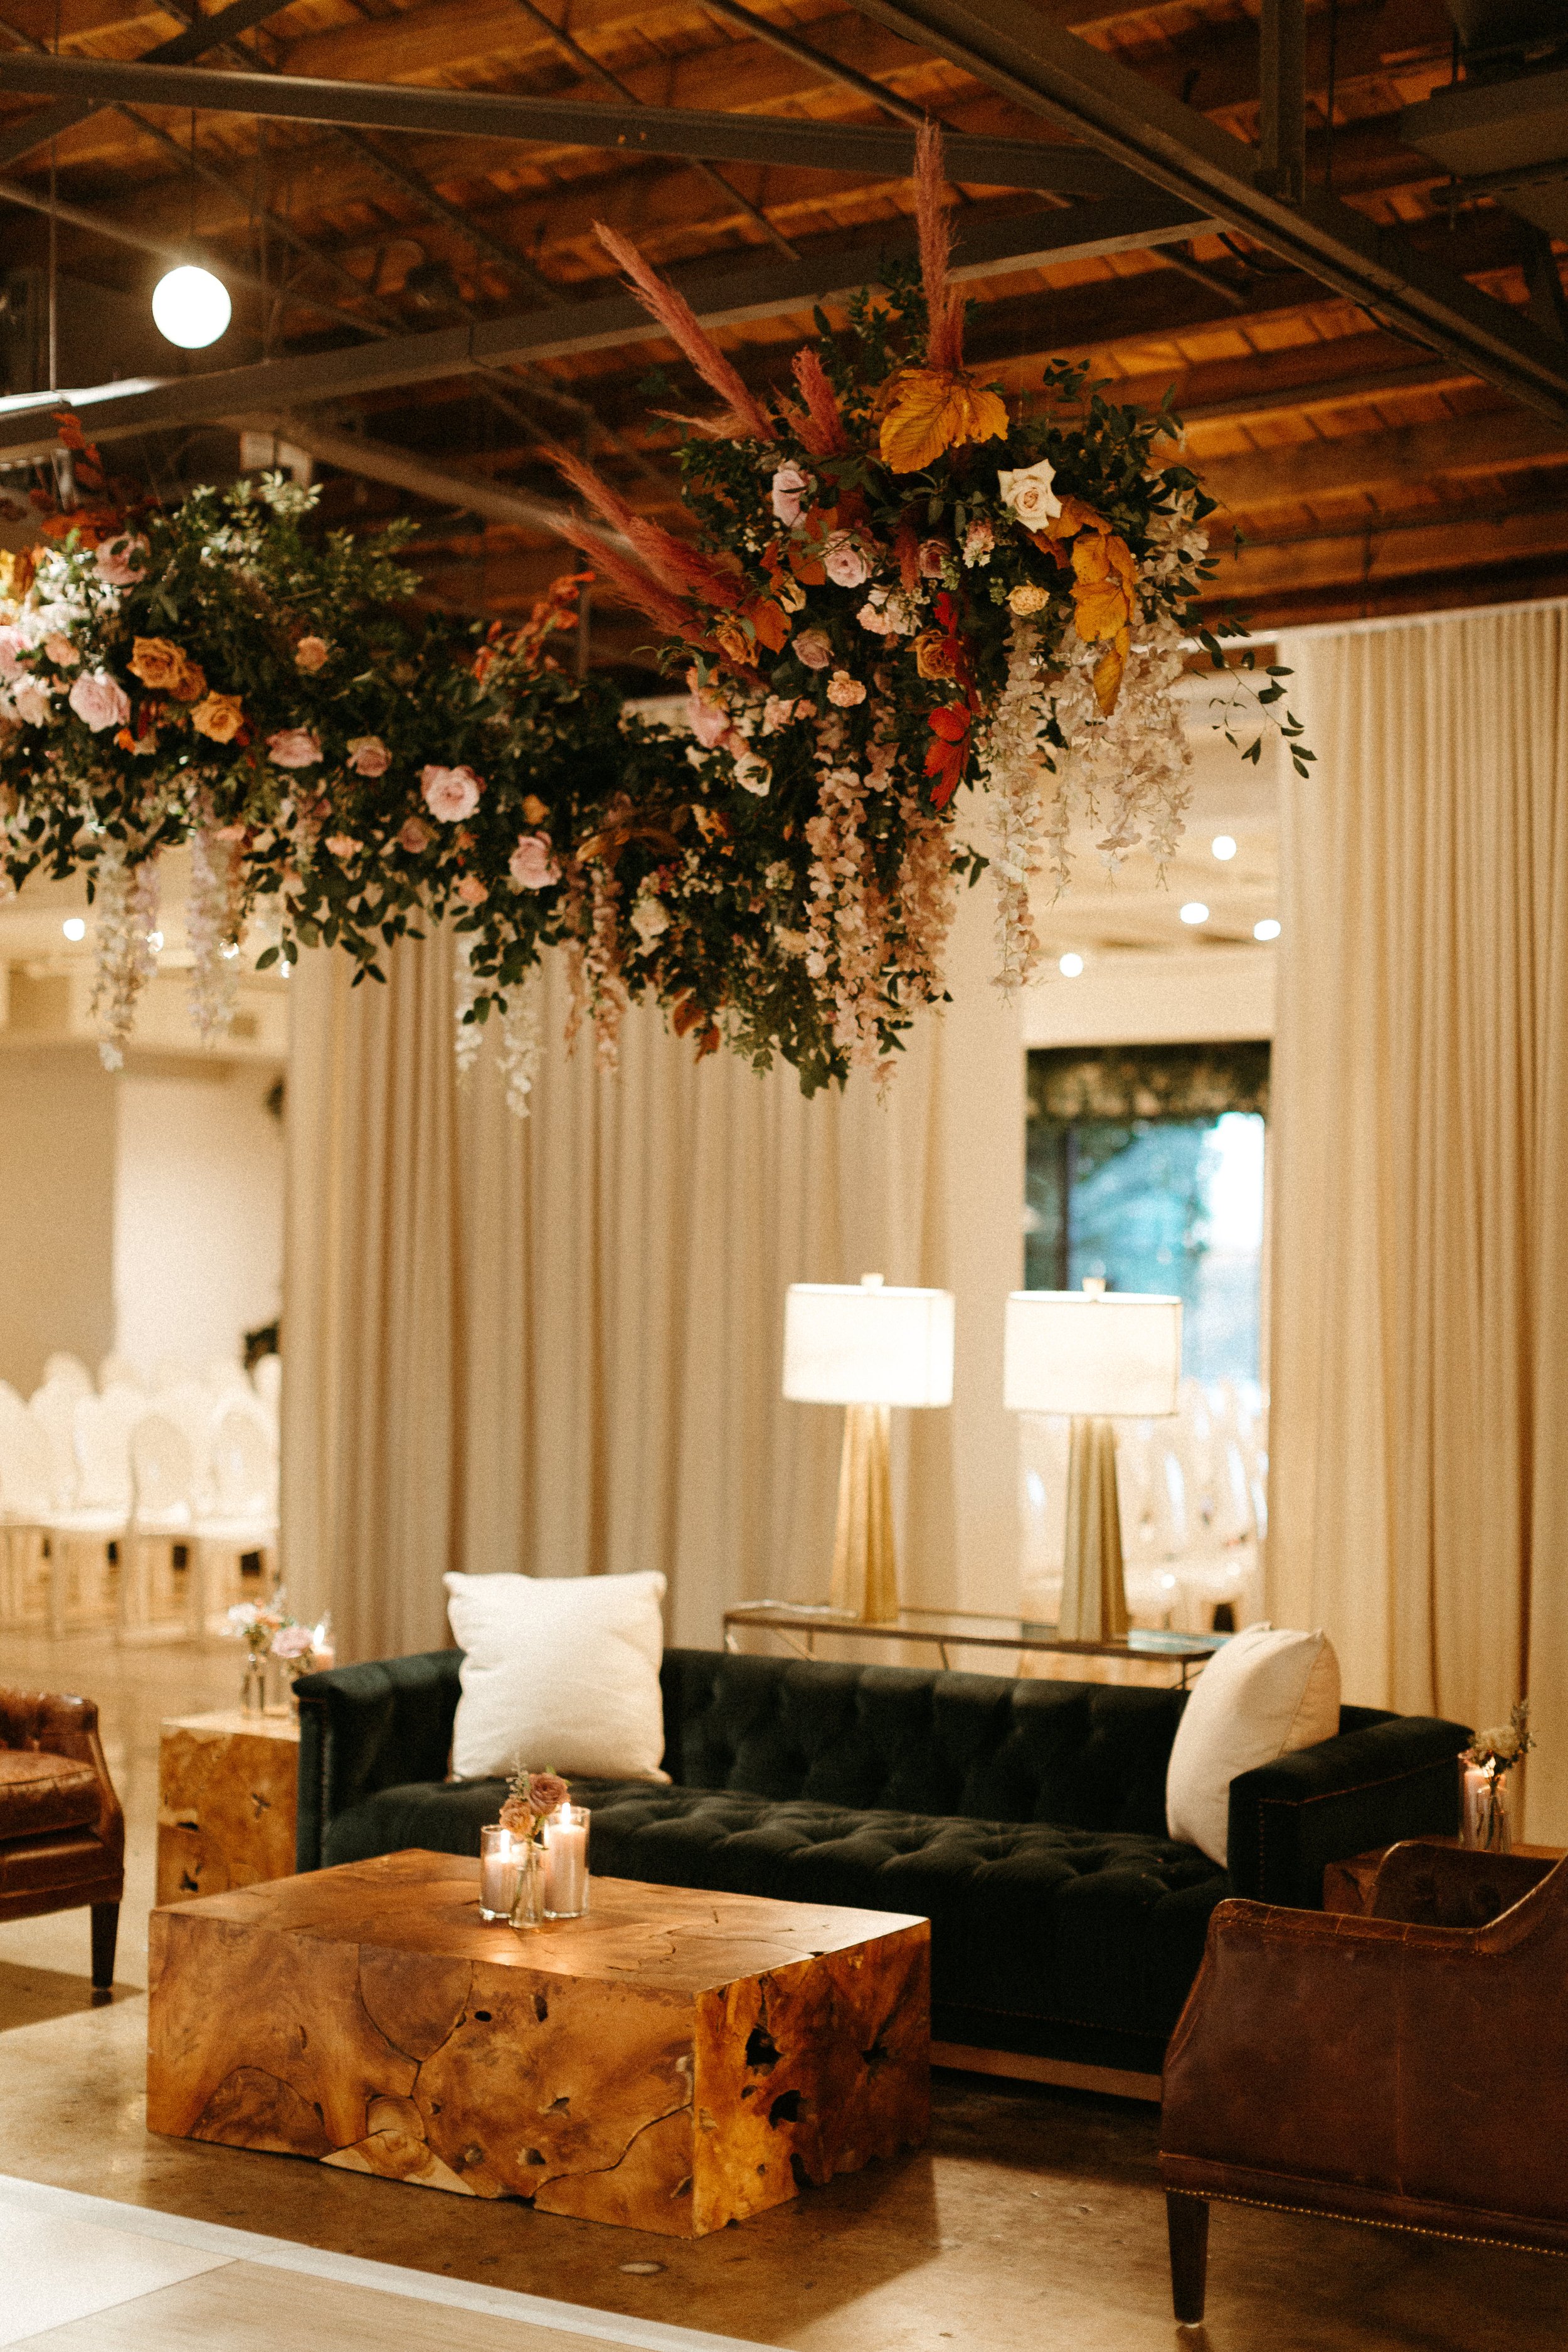 Stunning floral installations bring warmth to this Great Gatsby inspired wedding with florals of terra cotta, dusty pink, and burgundy hues. Petal heavy roses, wisteria, copper beech, and pink pampas grass accents. Designed by Rosemary and Finch in N